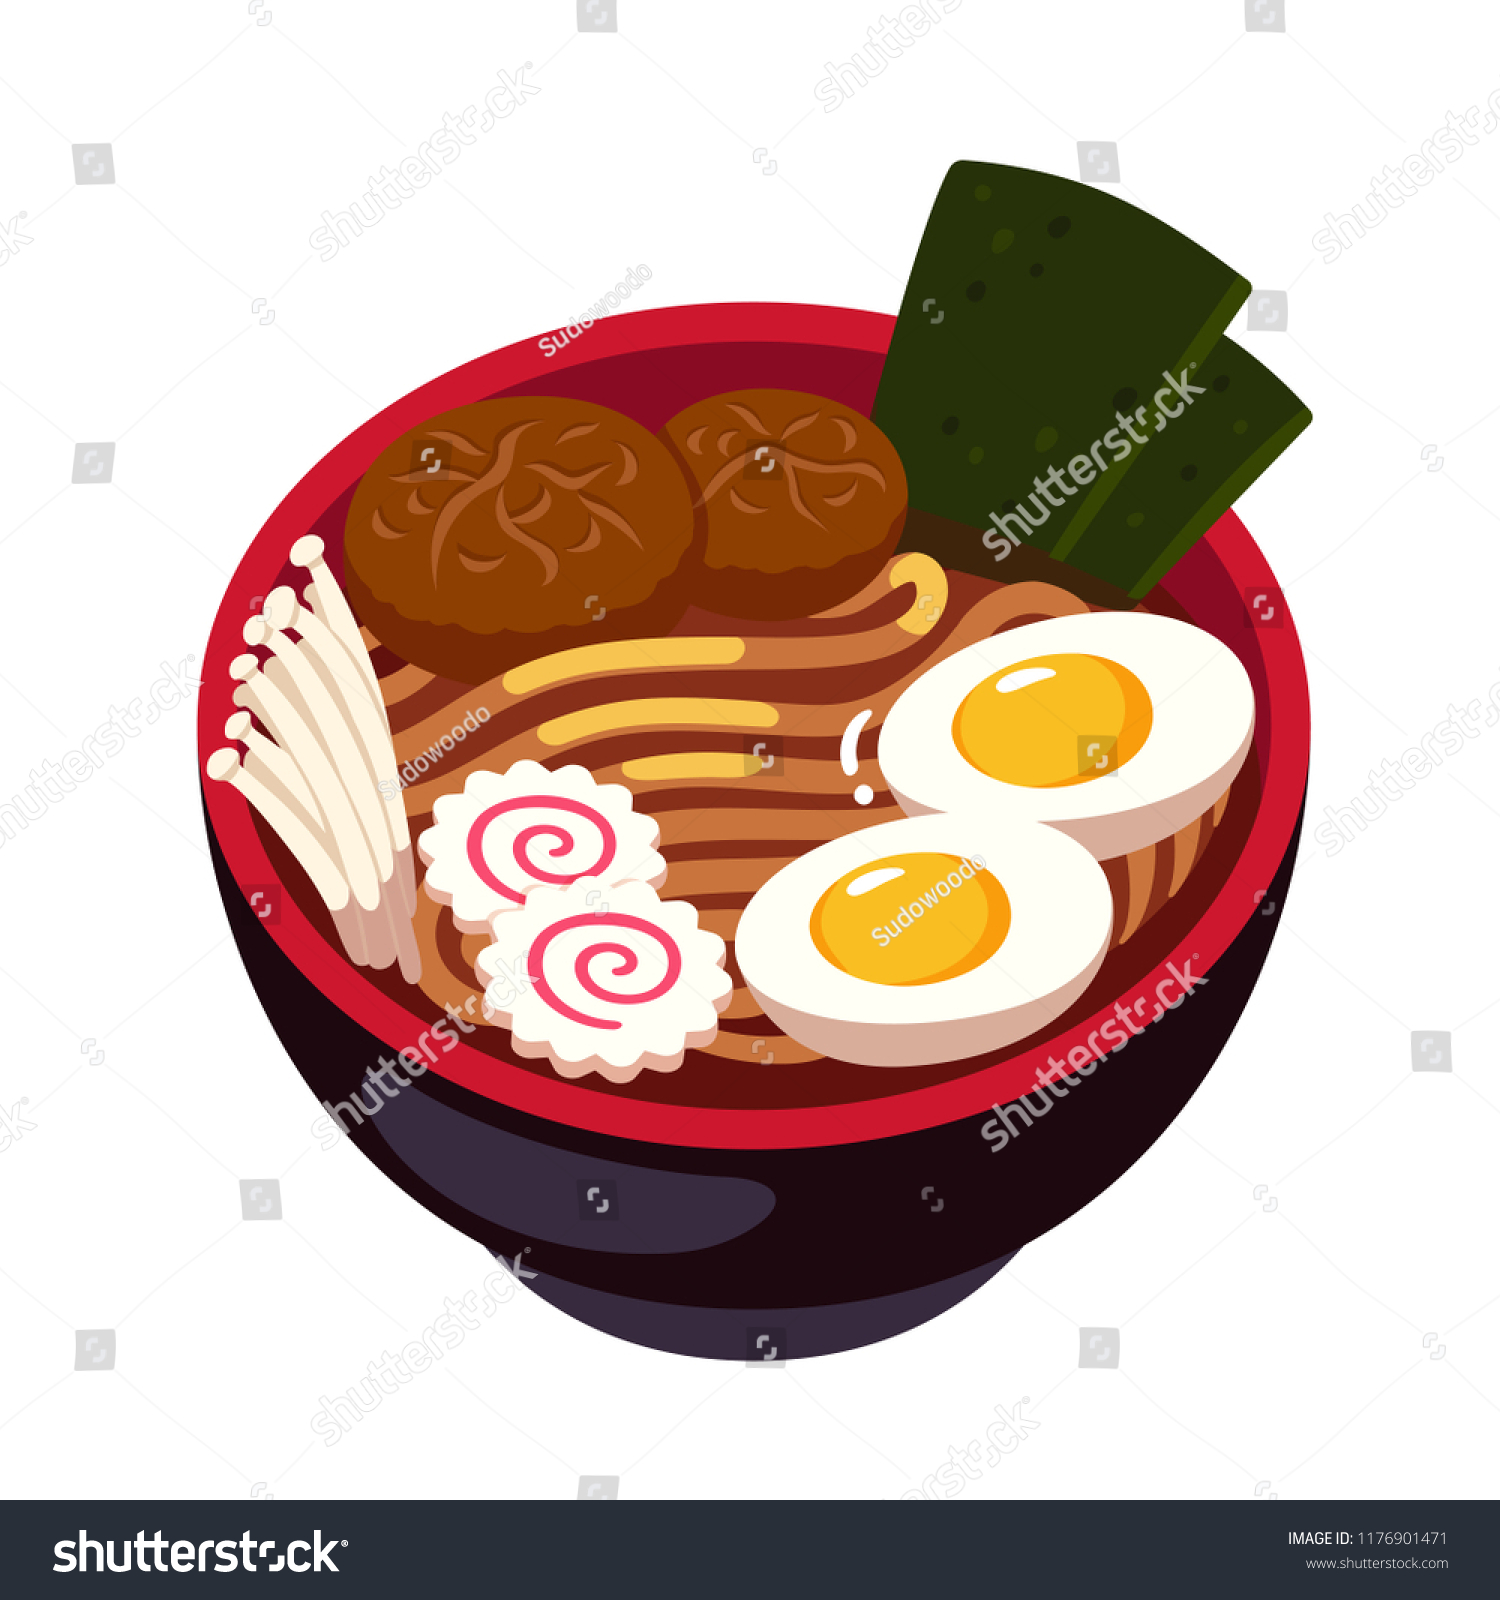 SVG of Ramen noodle soup bowl with enoki mushrooms, Naruto spiral fish cake and egg. Traditional Japanese cuisine dish. Cartoon vector illustration. svg